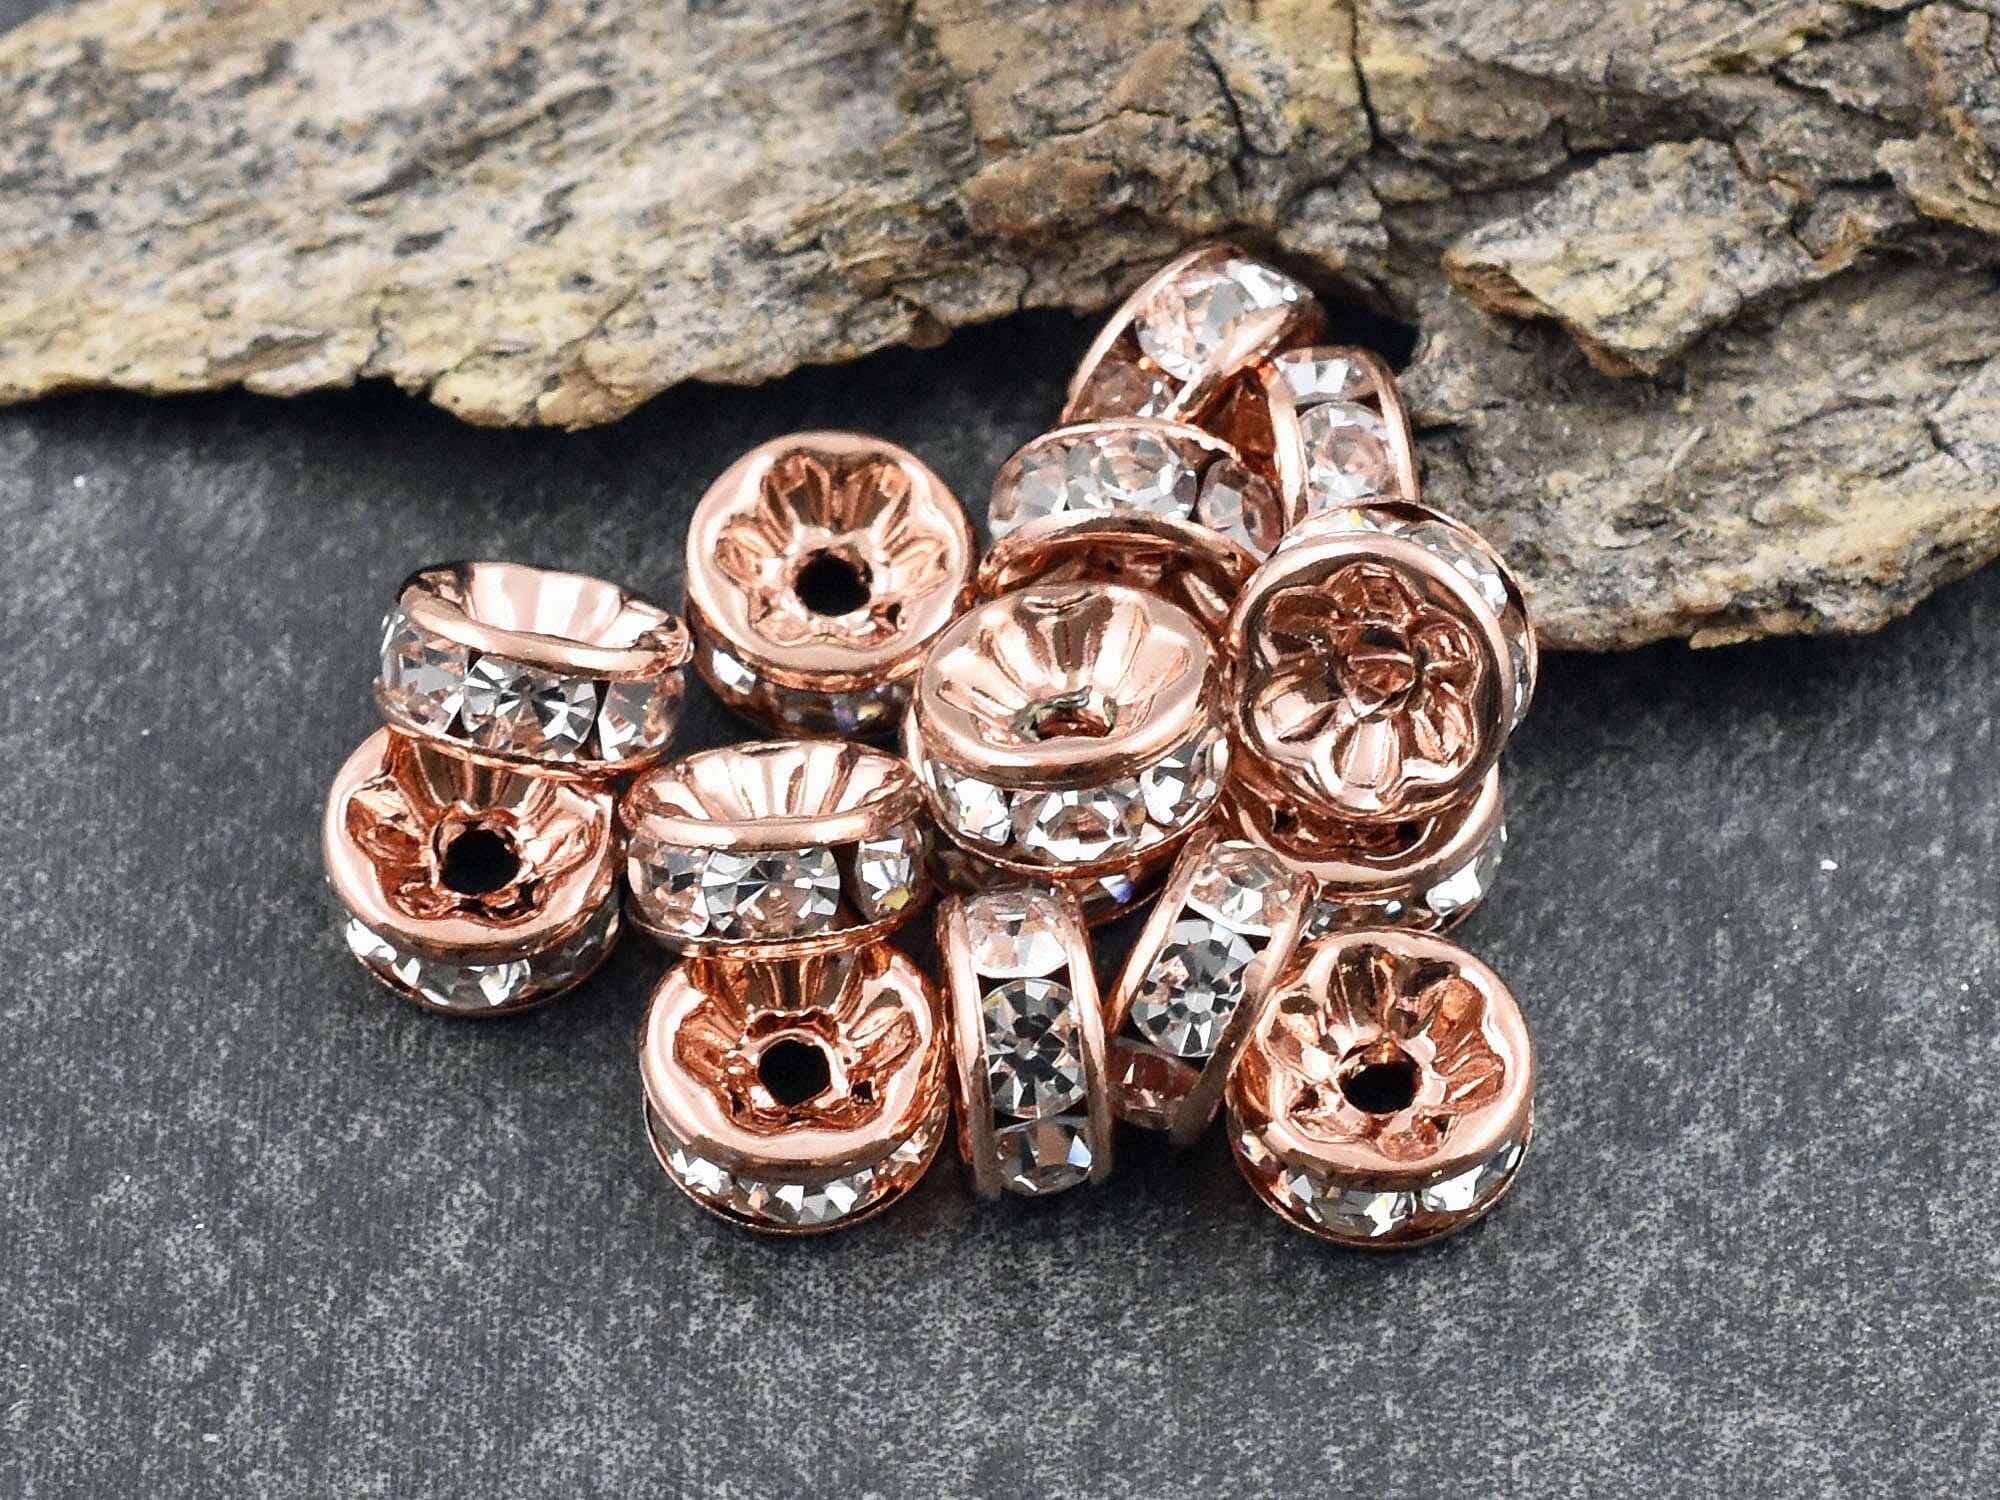 20 Pcs Rose Gold Clear Rhinestone Rondelle Spacer Beads 6mm X 3mm Grade AAA  Hole Size: 1mm Straight Edge 